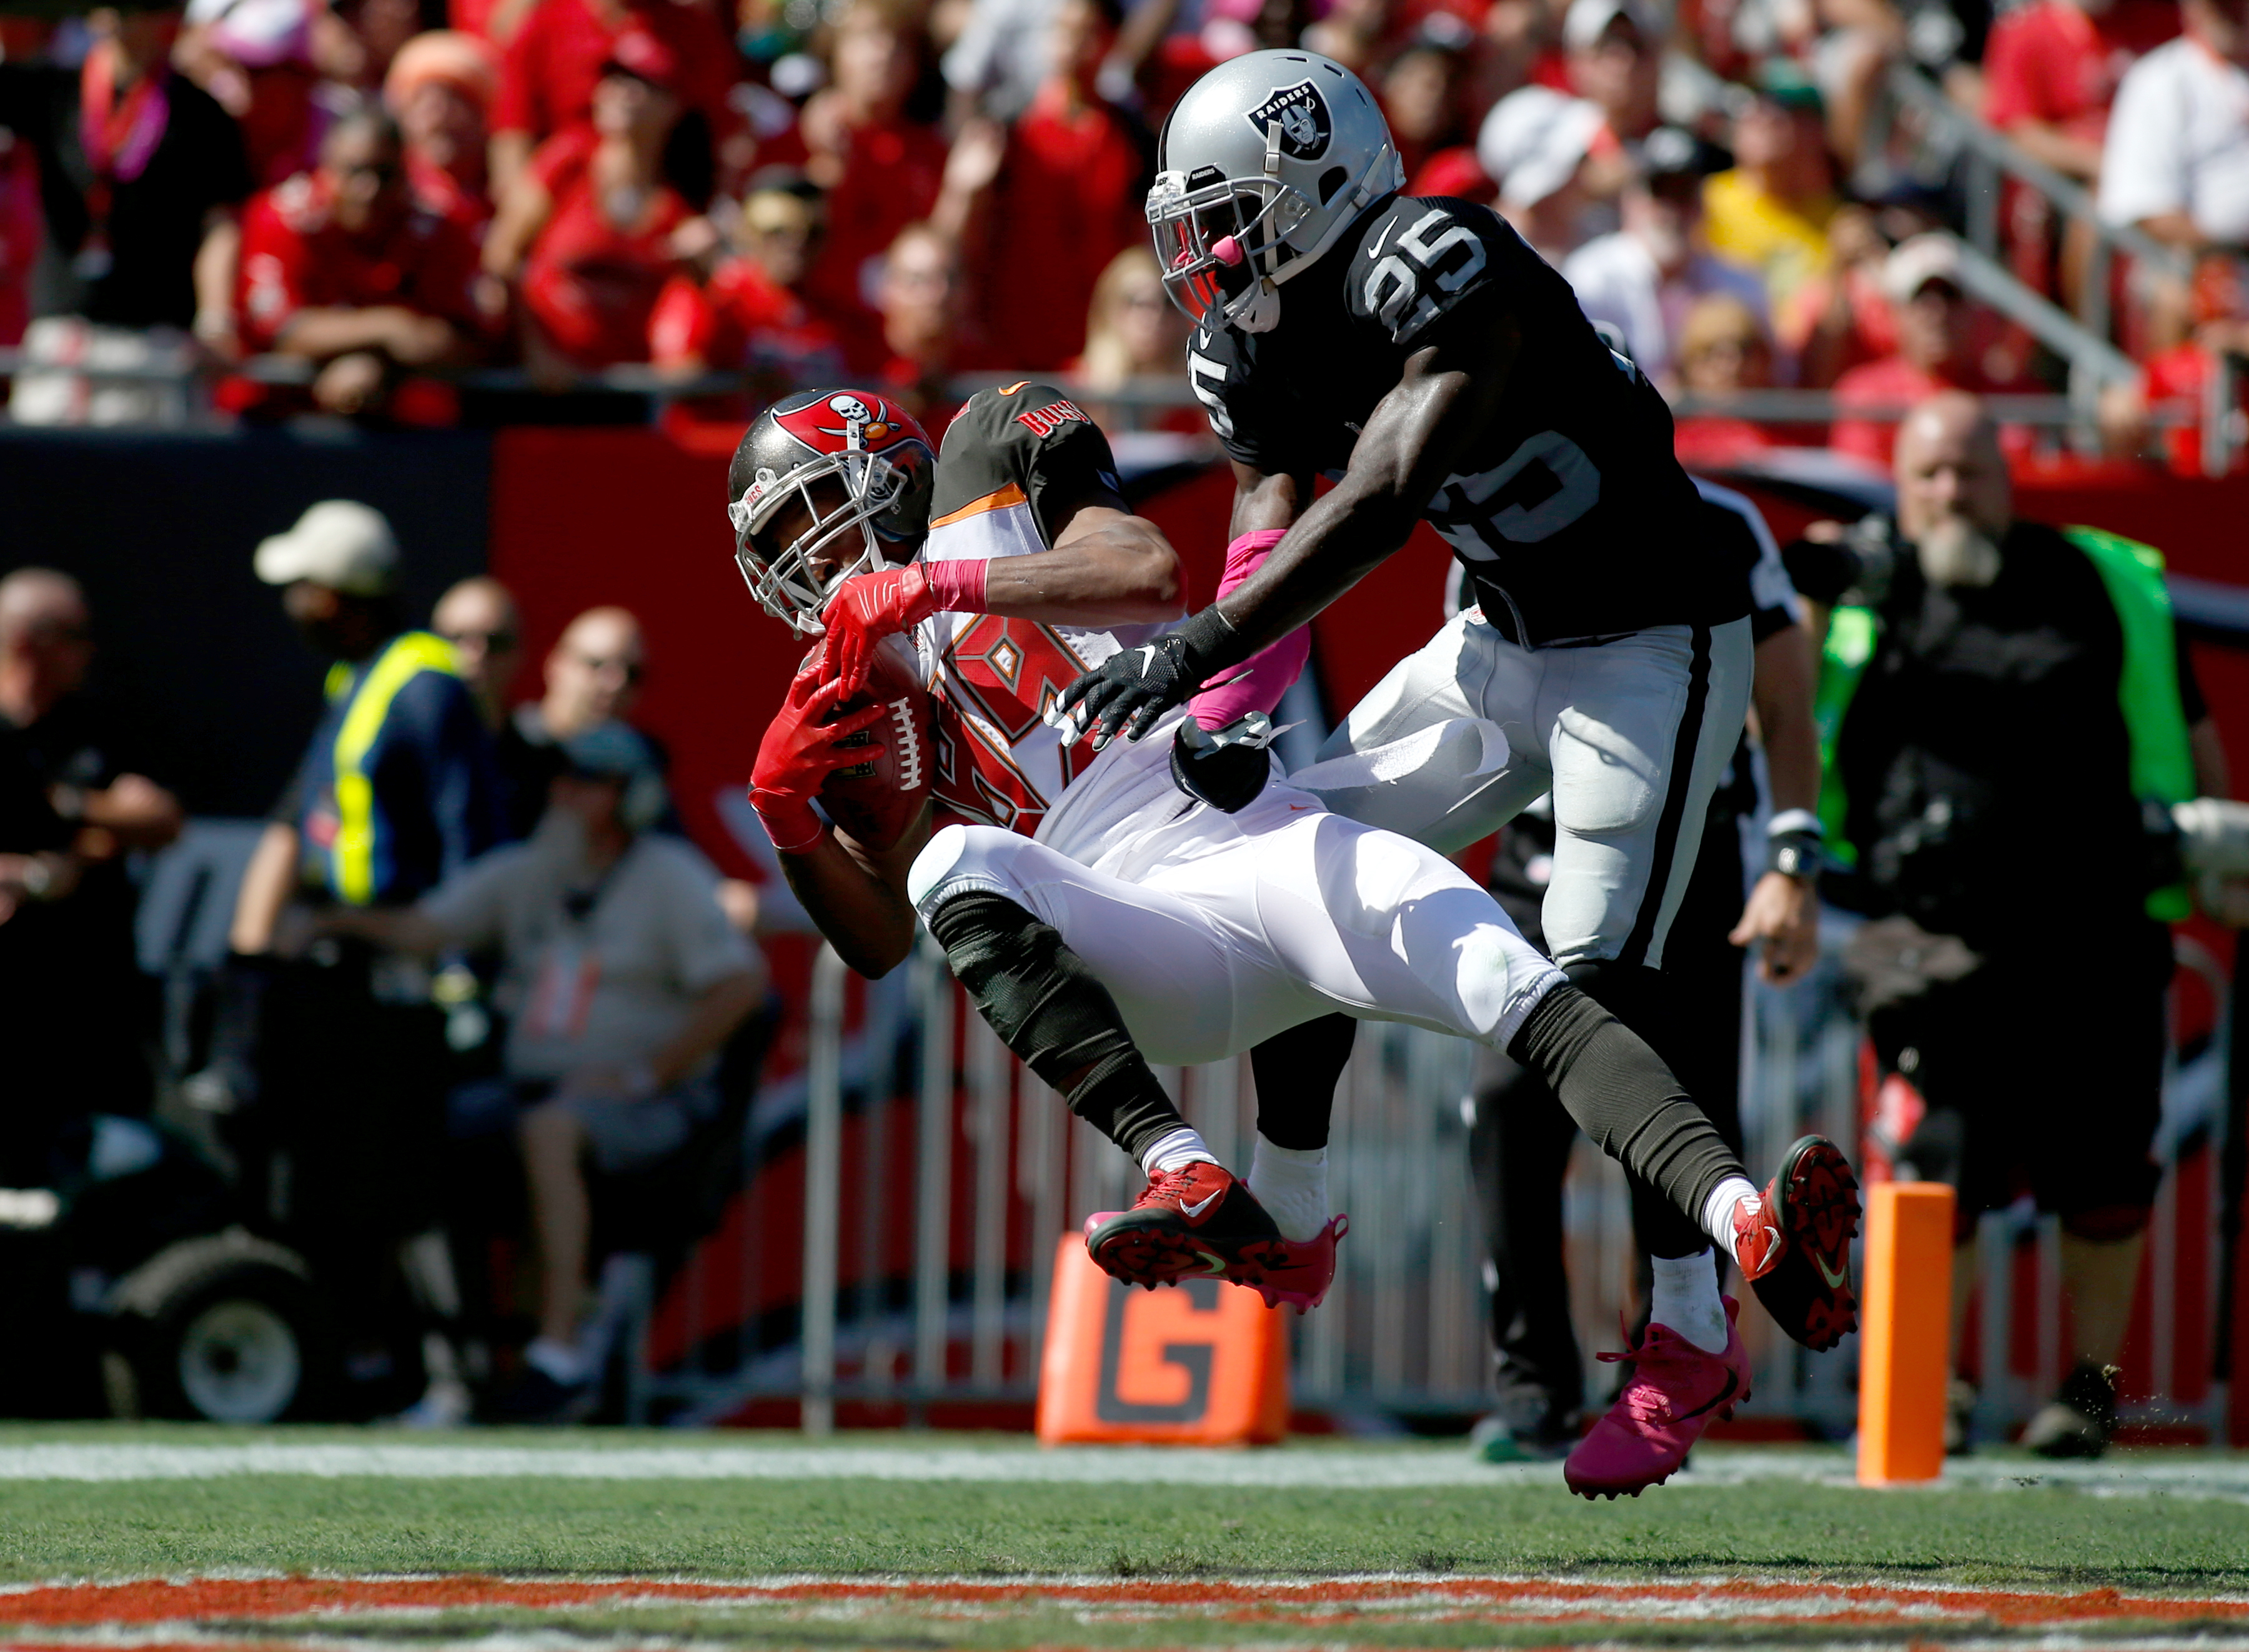 D.J. Hayden #25 of the Oakland Raiders playing against the Tampa Bay Buccaneers on October 30, 2016 in Tampa, Florida | Source: Getty Images